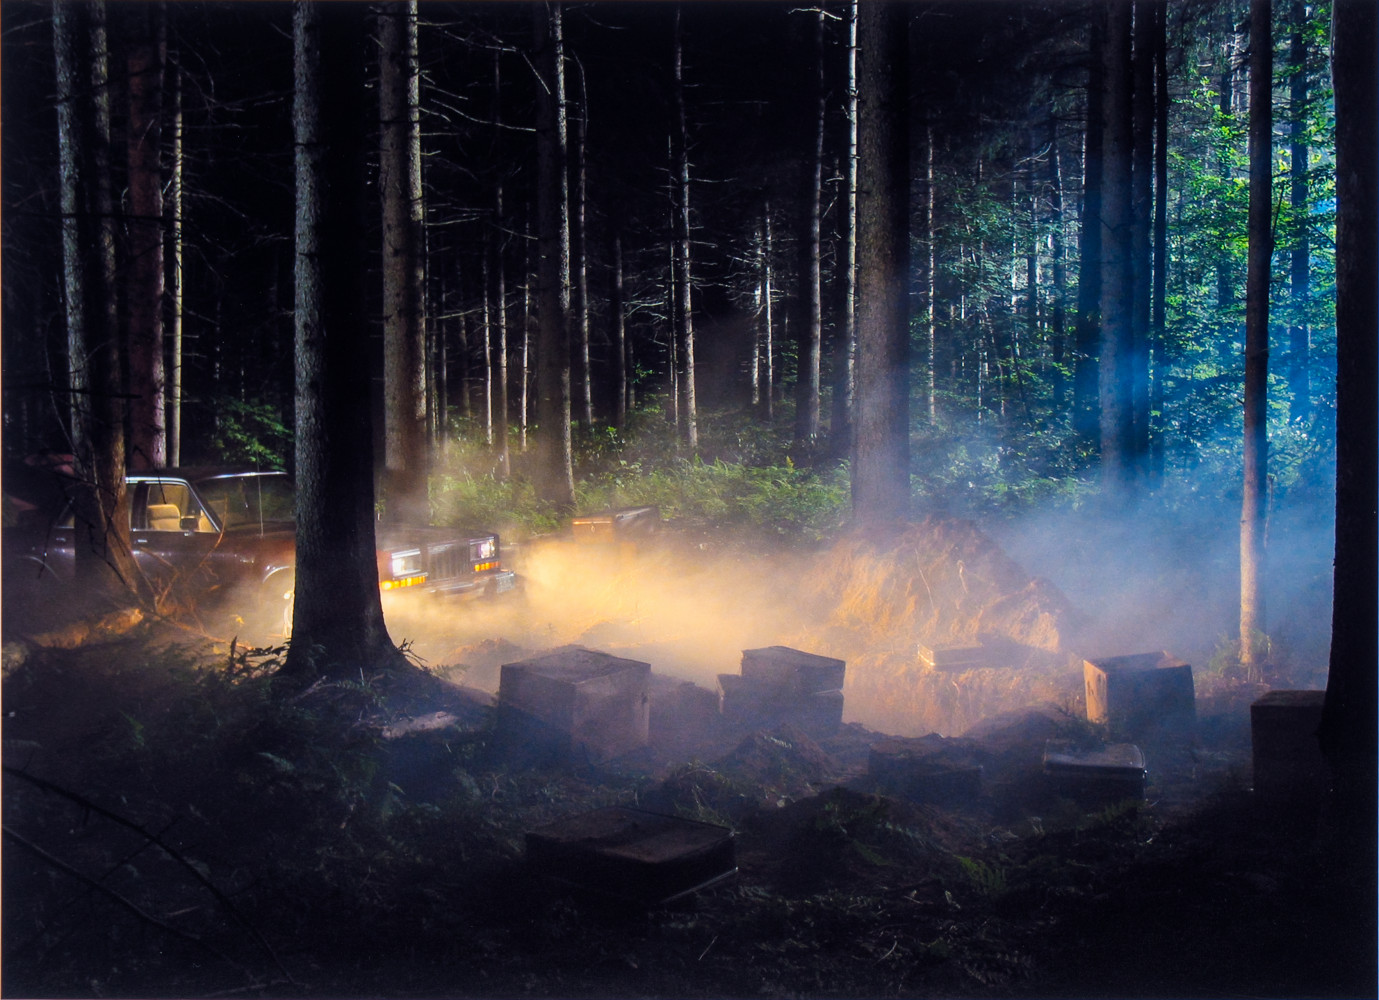 ‘Gregory Crewdson’, Production Still (Man in the Woods #4), 2003, digital c-print